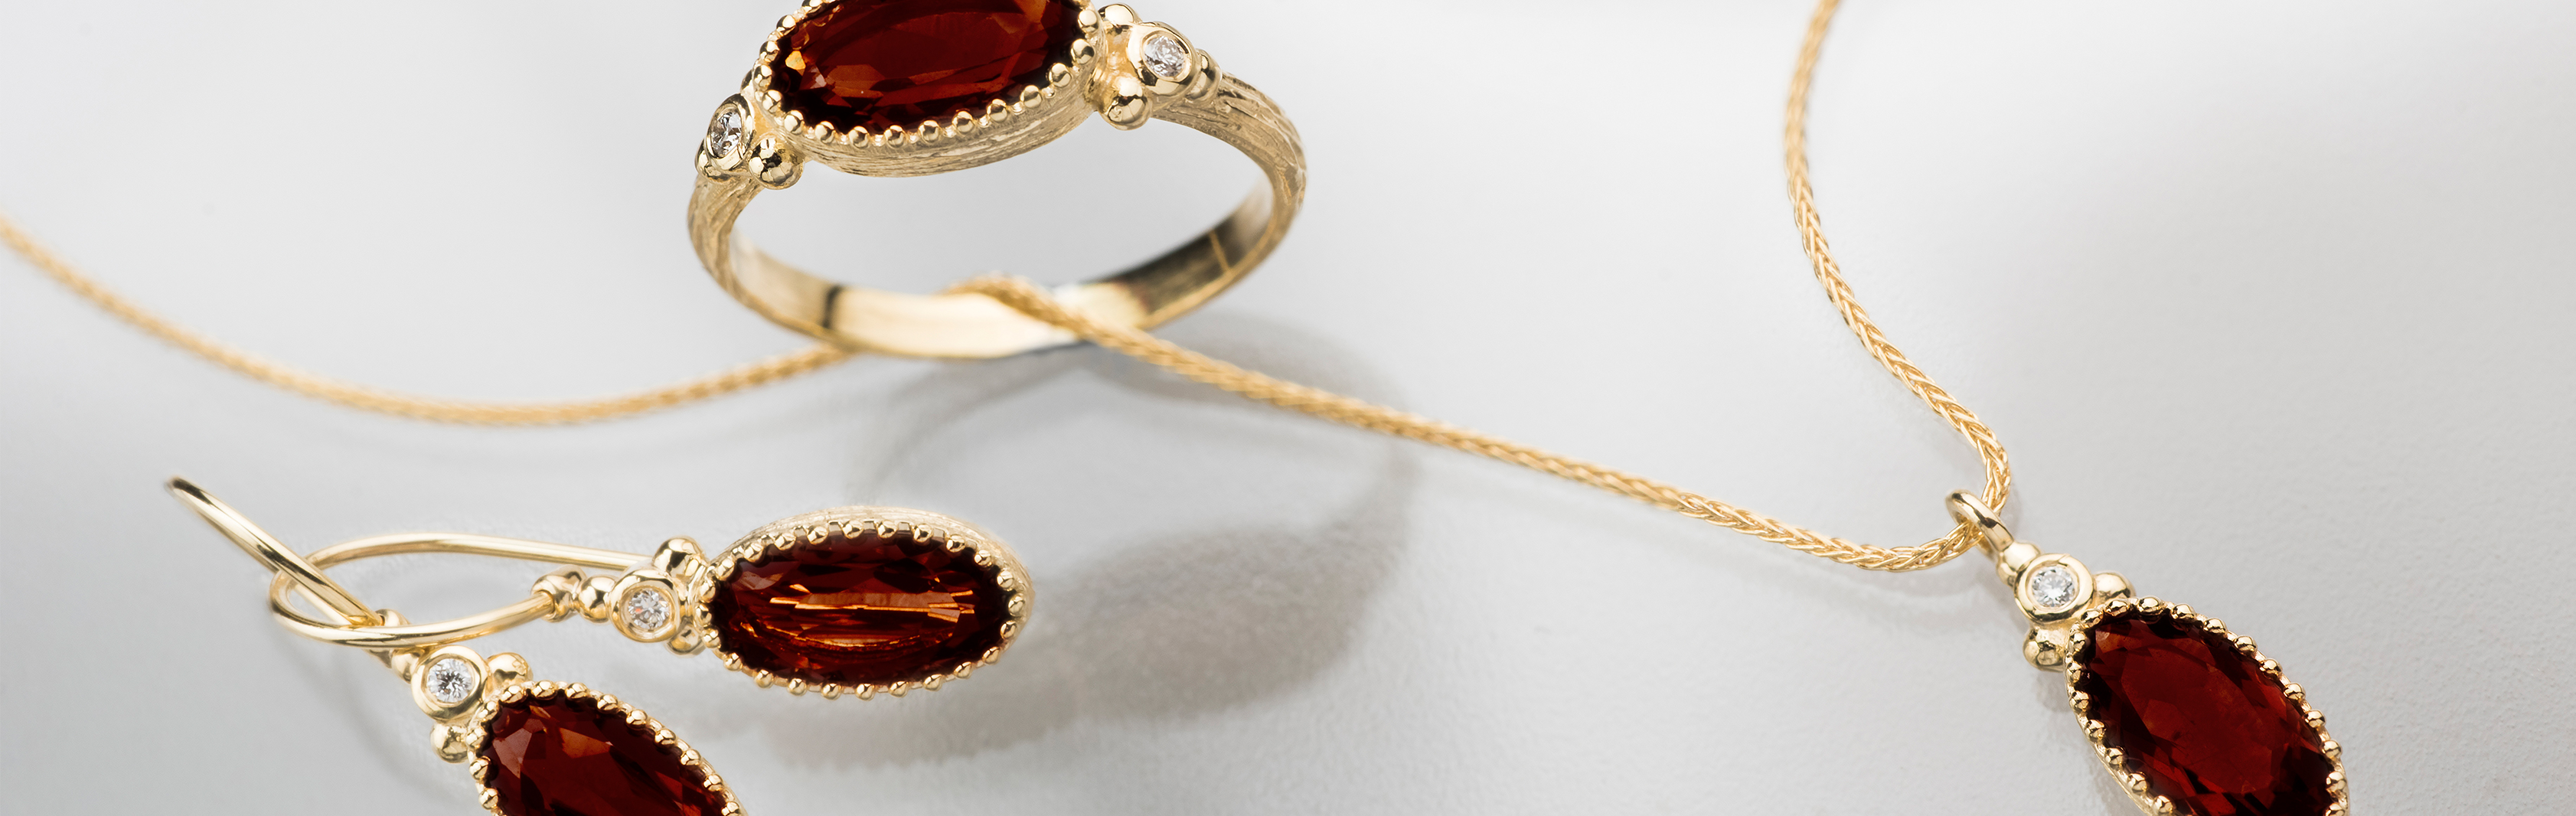 Carmine Collection | 14K Gold Jewelry with Garnet and Diamonds